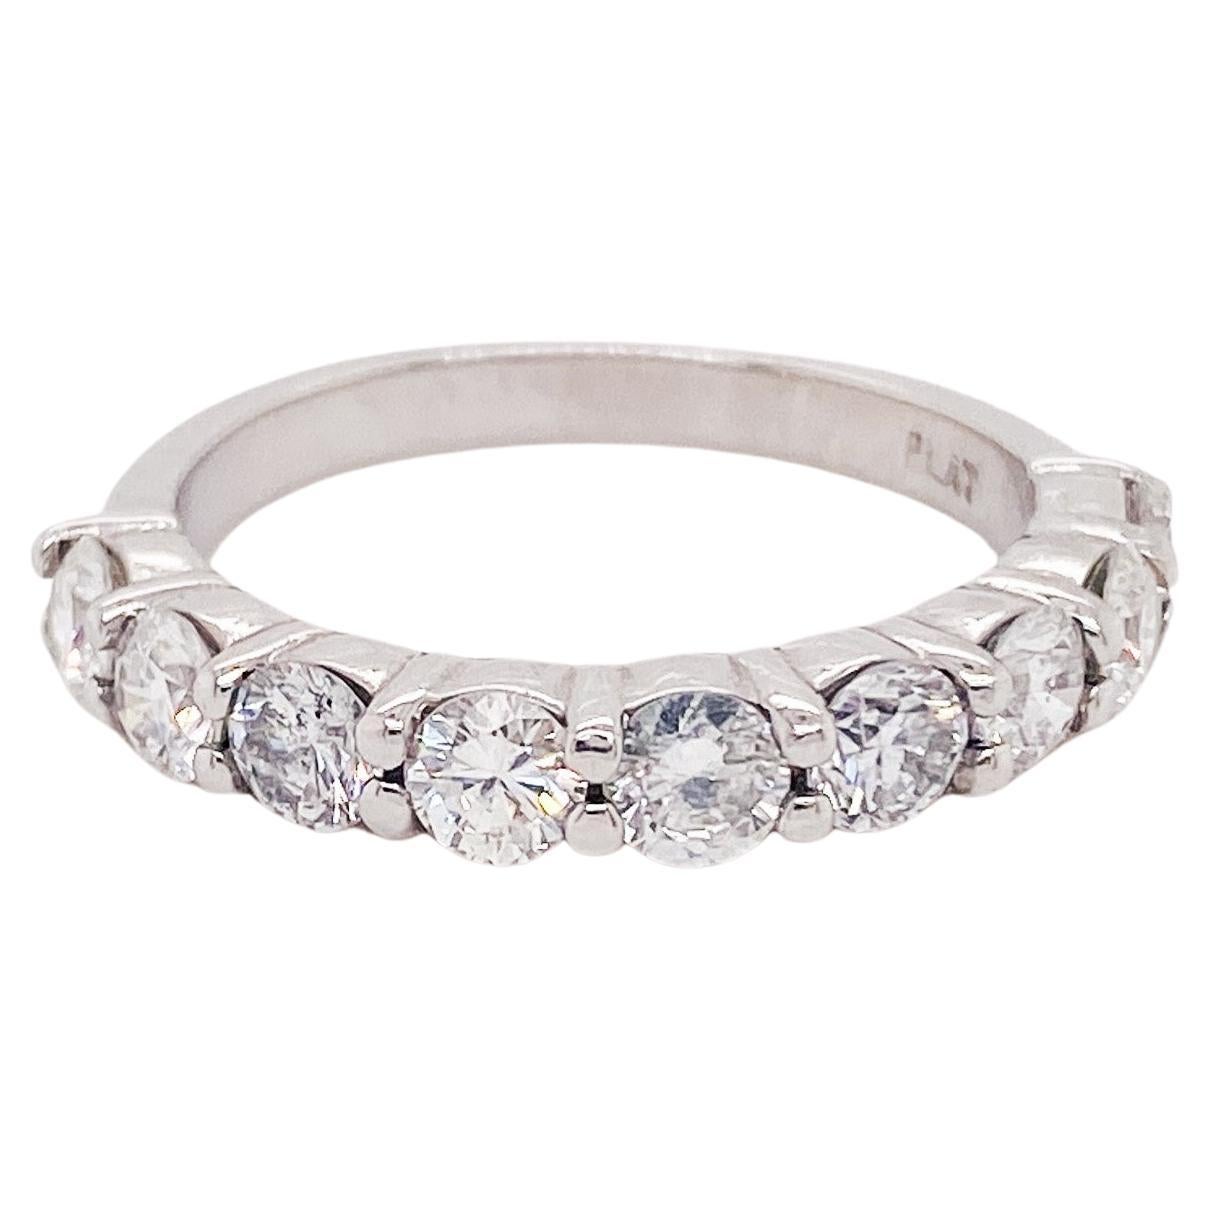 Platinum Diamond Band with 9 Diamonds 1.35 Carats Stackable Wedding Band For Sale